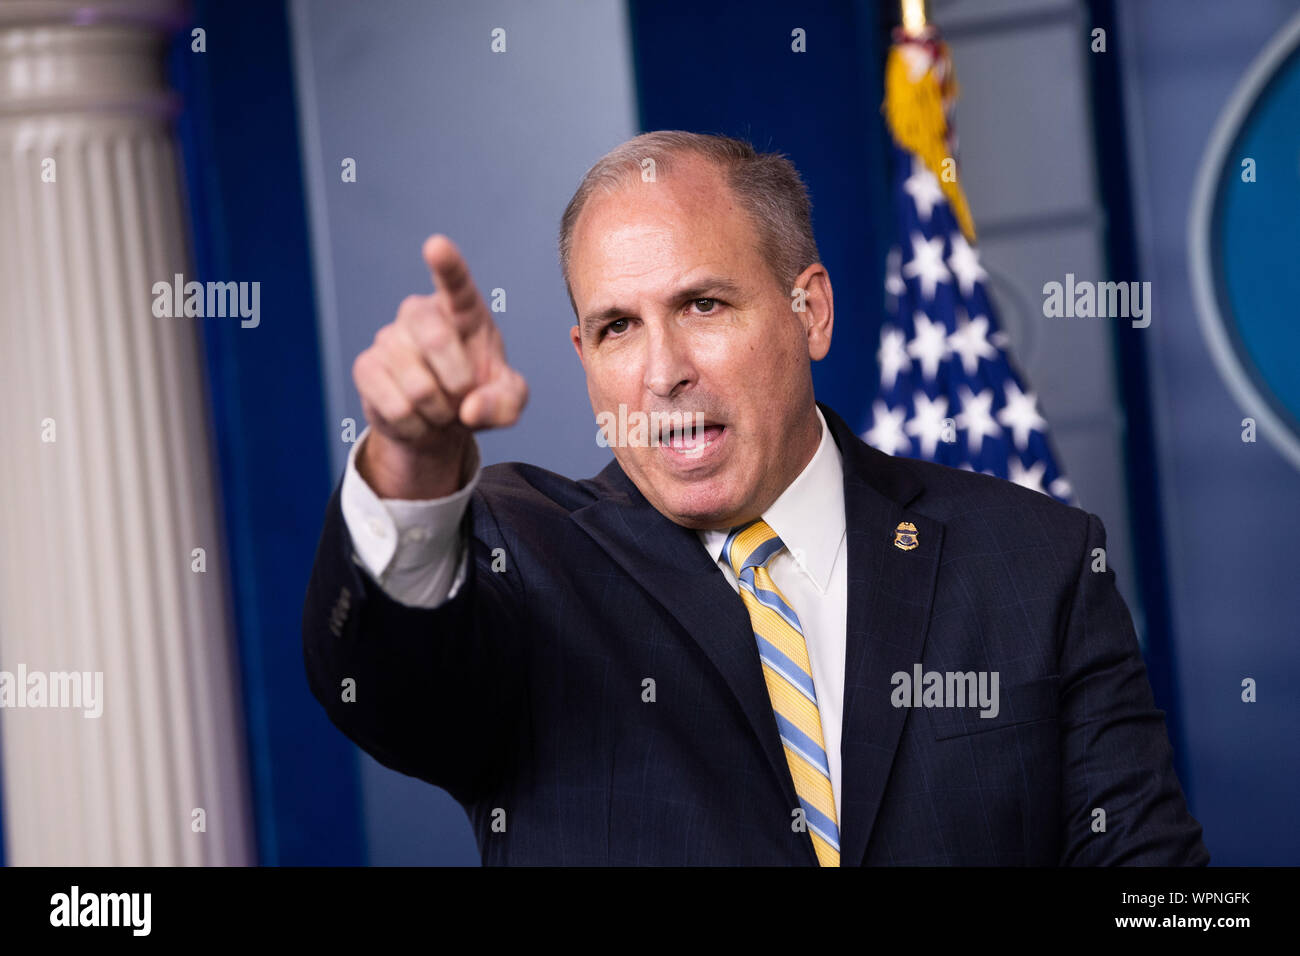 Acting Commissioner of Customs and Border Protection speaks to the media at the White House in Washington, DC on Monday, September 9, 2019. Photo by Kevin Dietsch/UPI Stock Photo